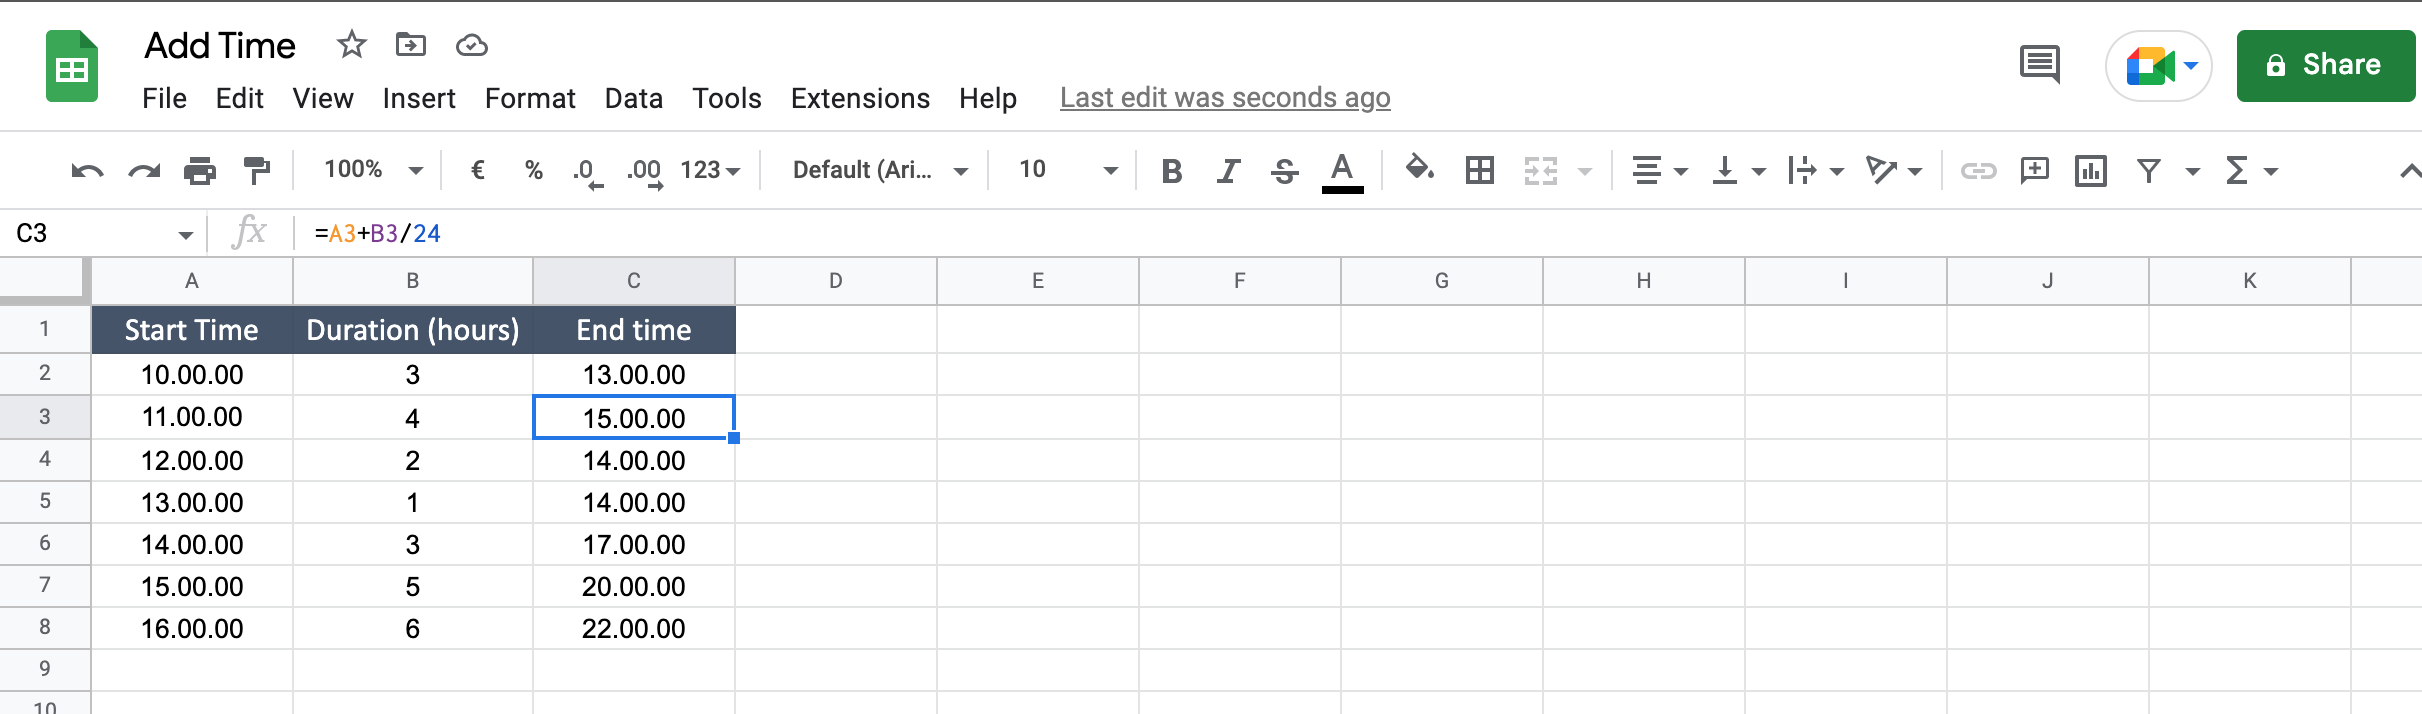 Final Image How To Add Time In Google Sheets 